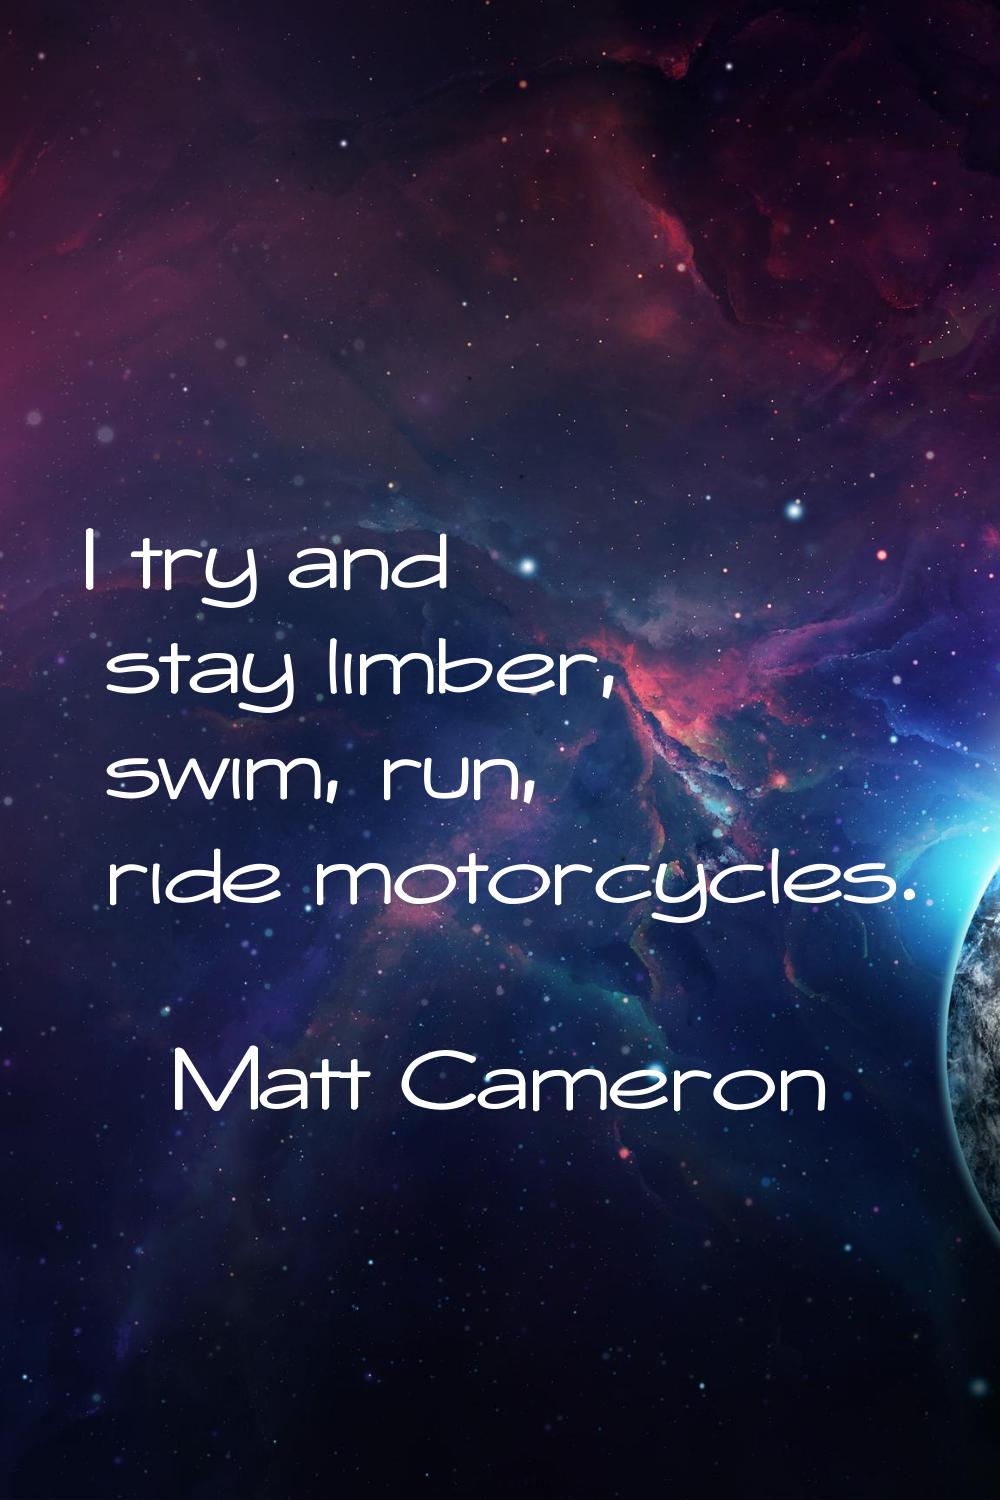 I try and stay limber, swim, run, ride motorcycles.